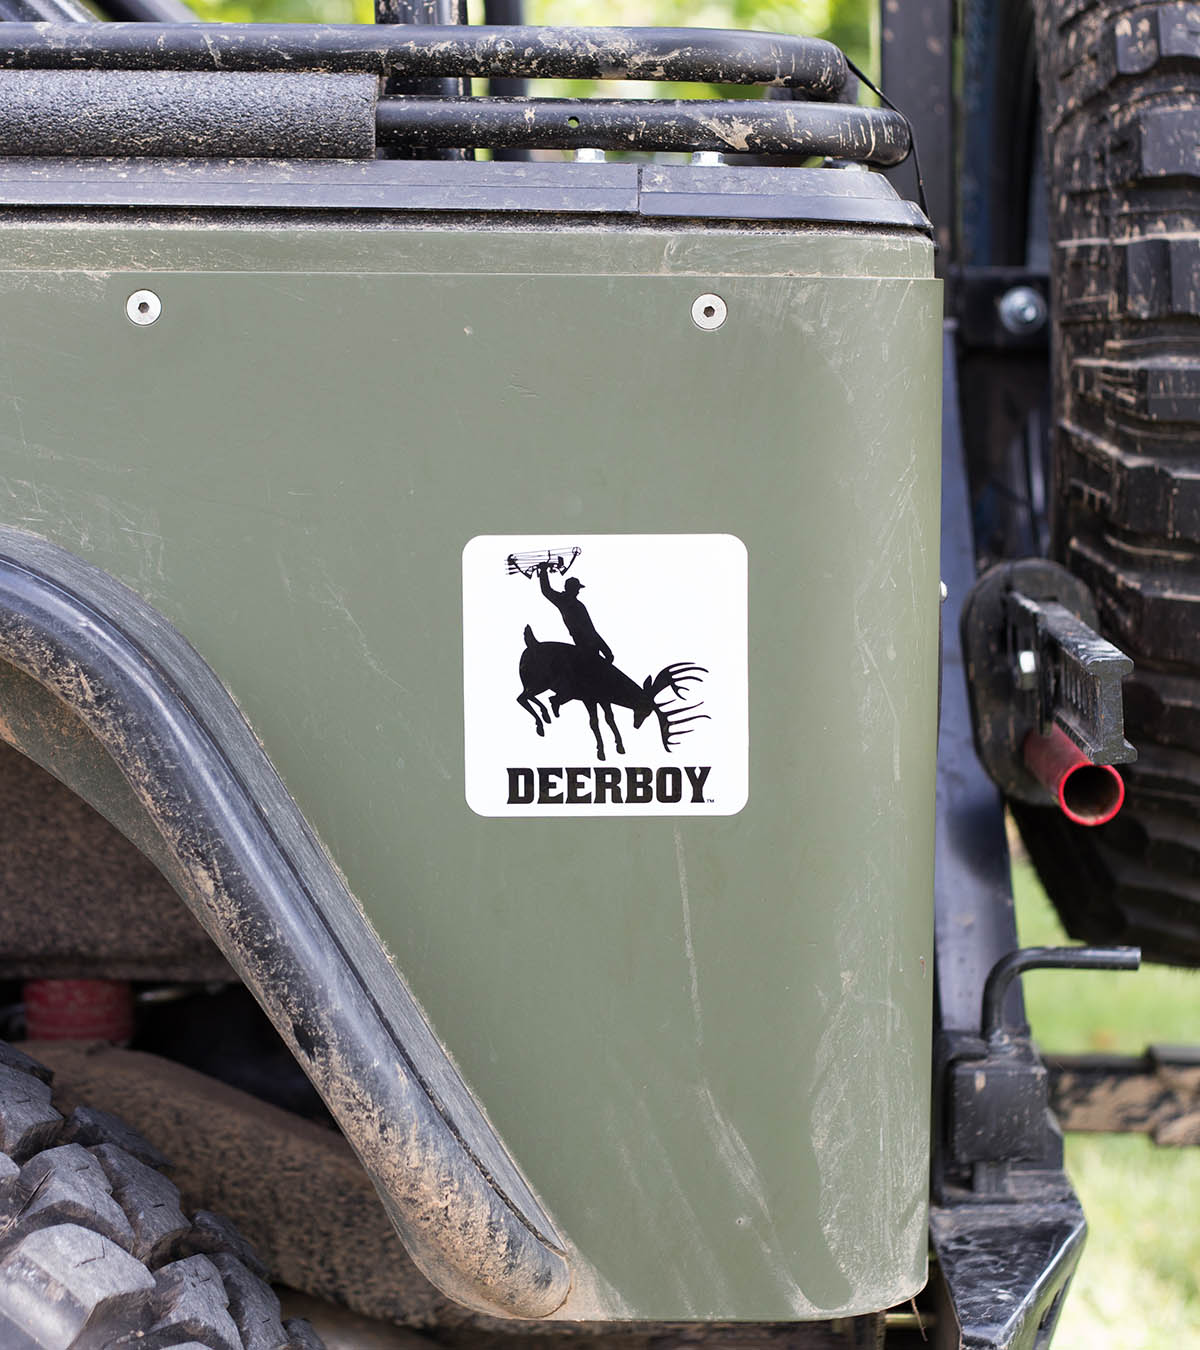 Deerboy Signature Bow Decal In Black/White